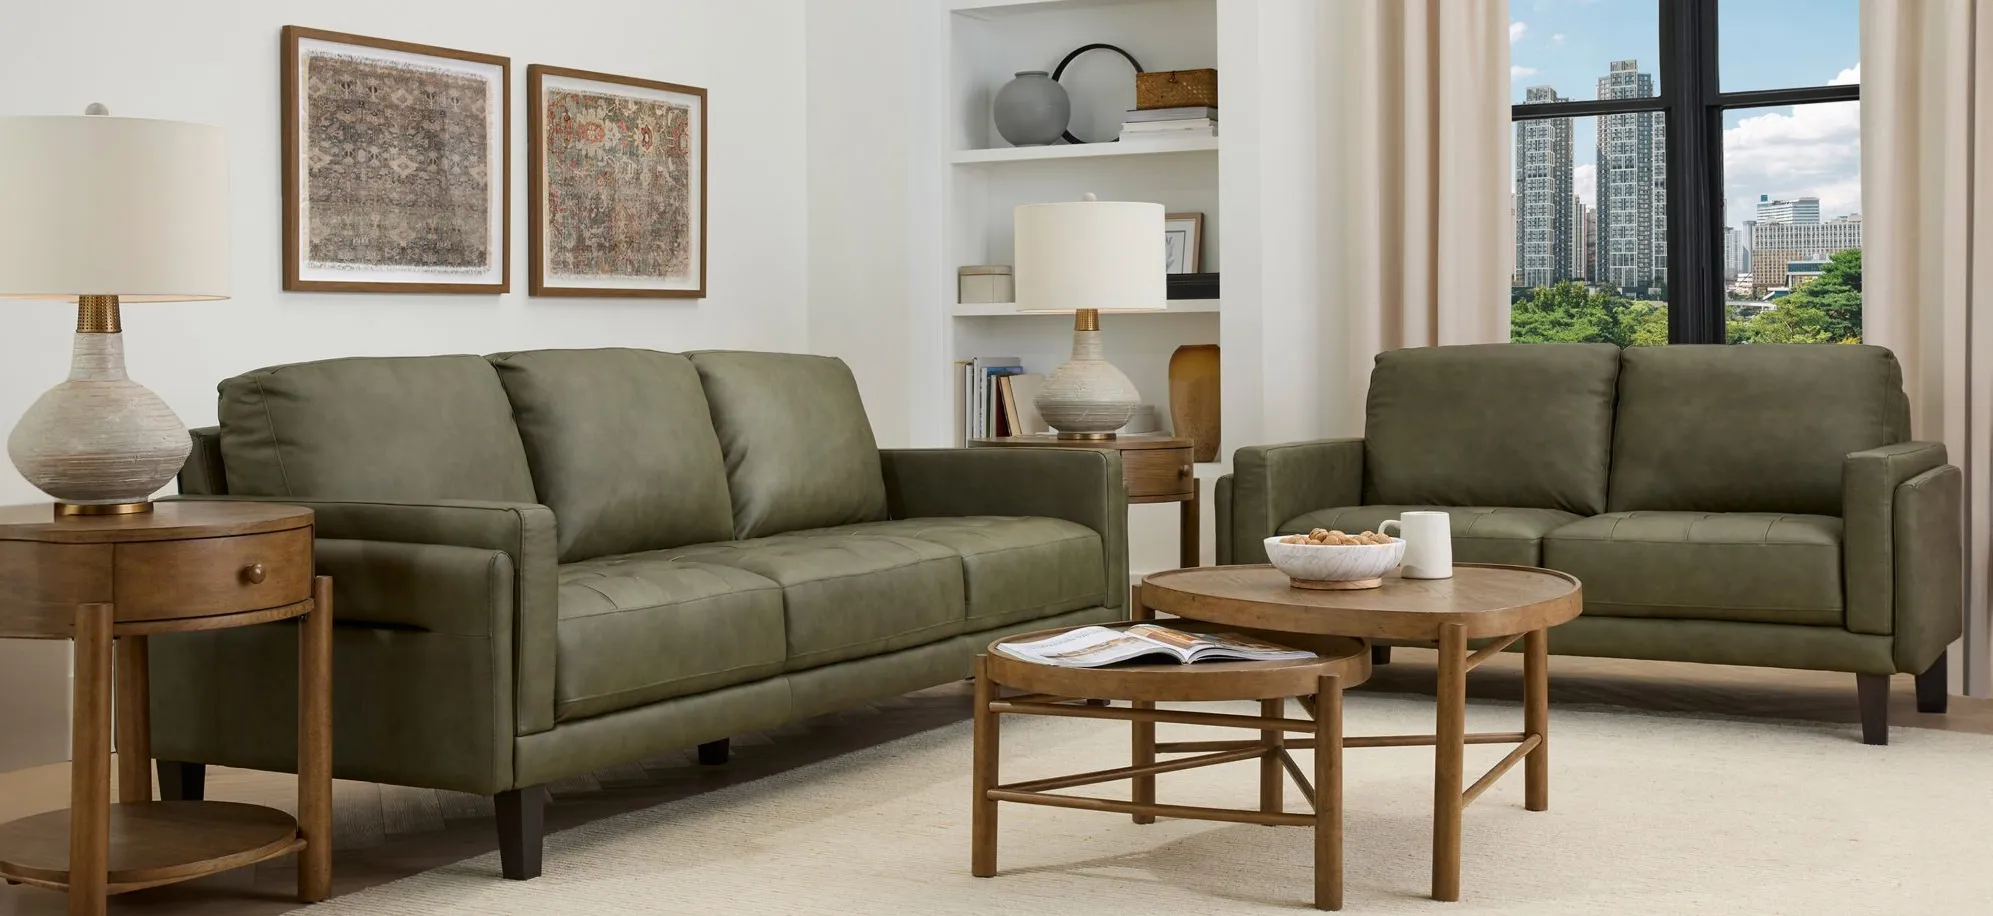 Hunter 2-pc. Sofa & Loveseat in Green by Chateau D'Ax